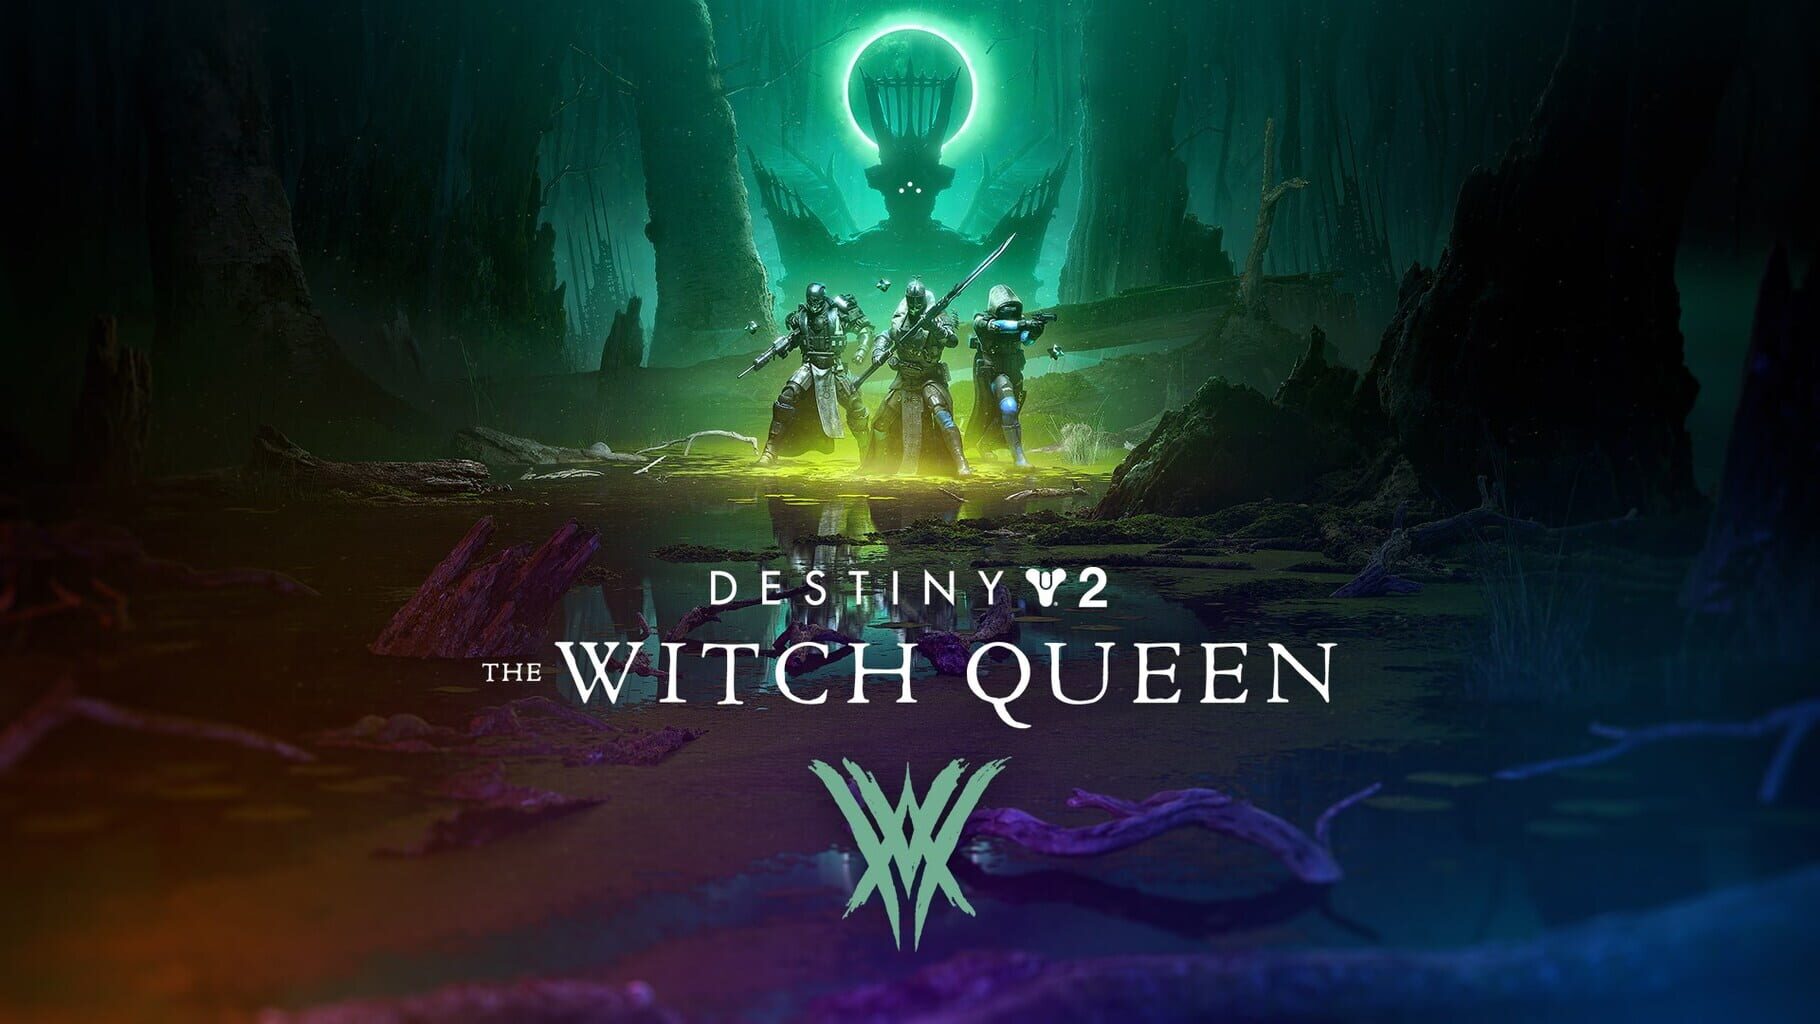 Artwork for Destiny 2: The Witch Queen